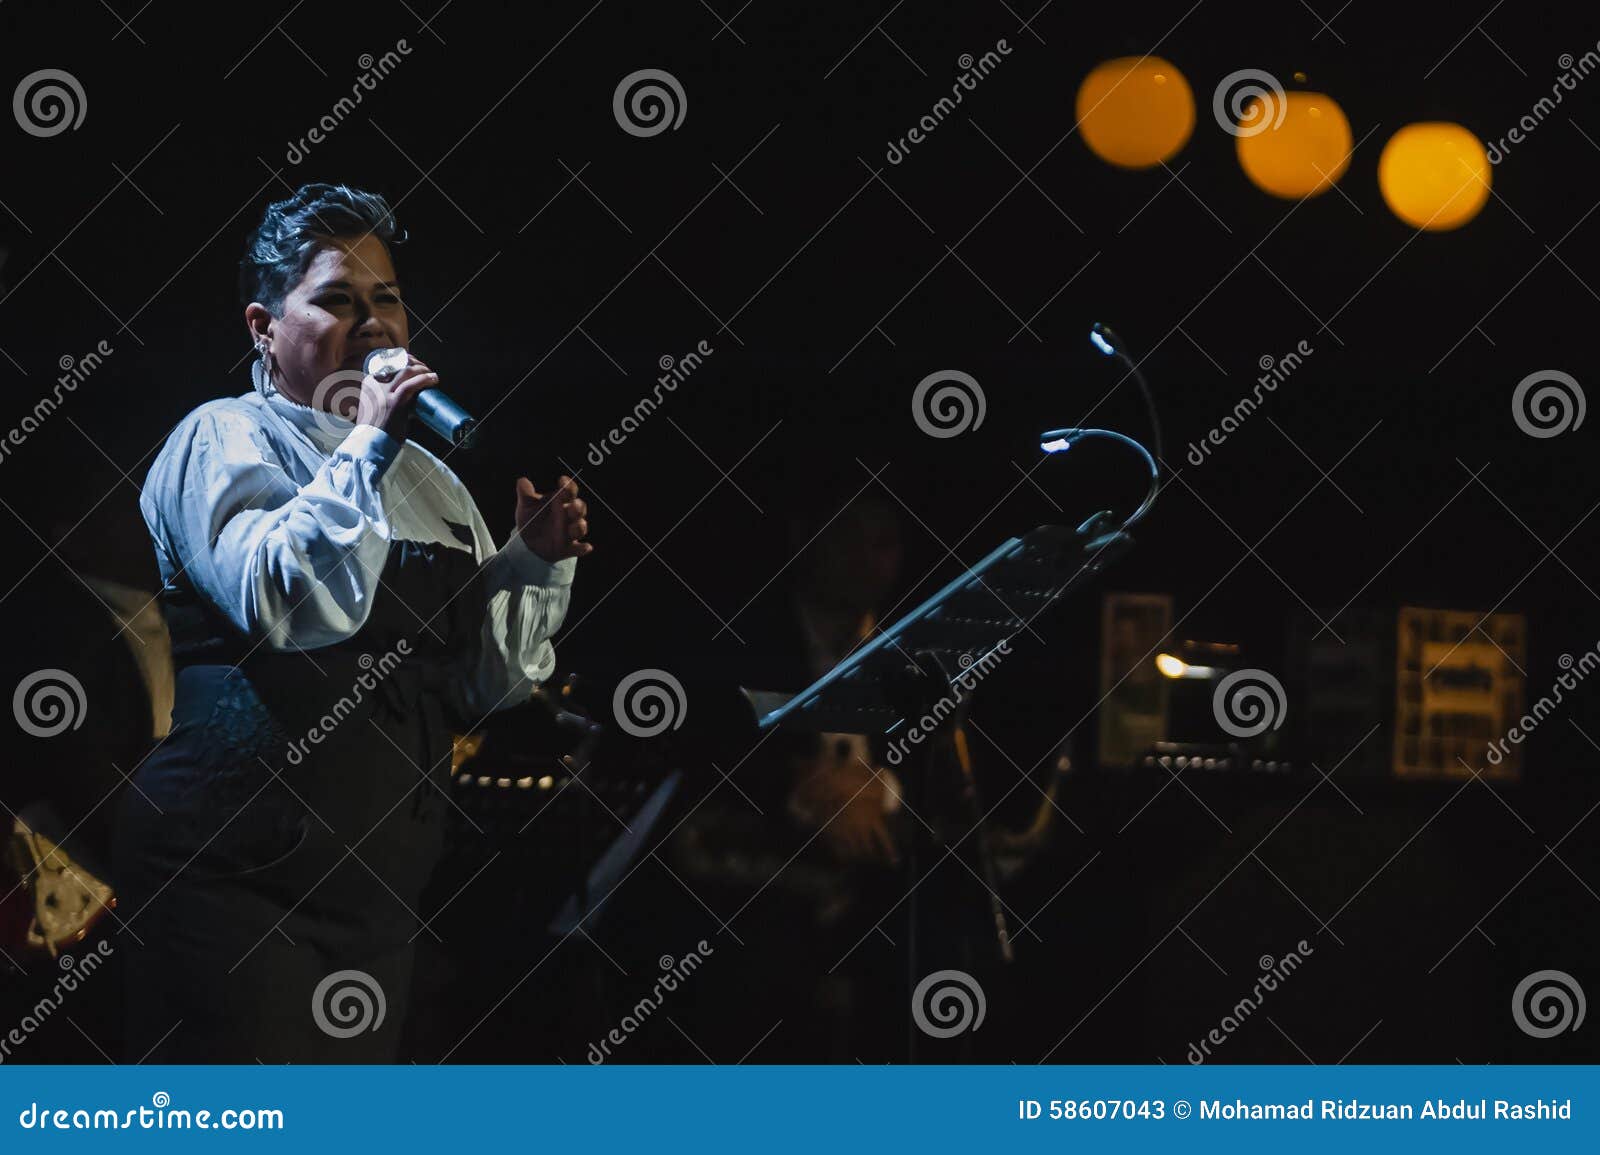 Singing on Stage in Dark Studio Editorial Stock Photo - Image of ...